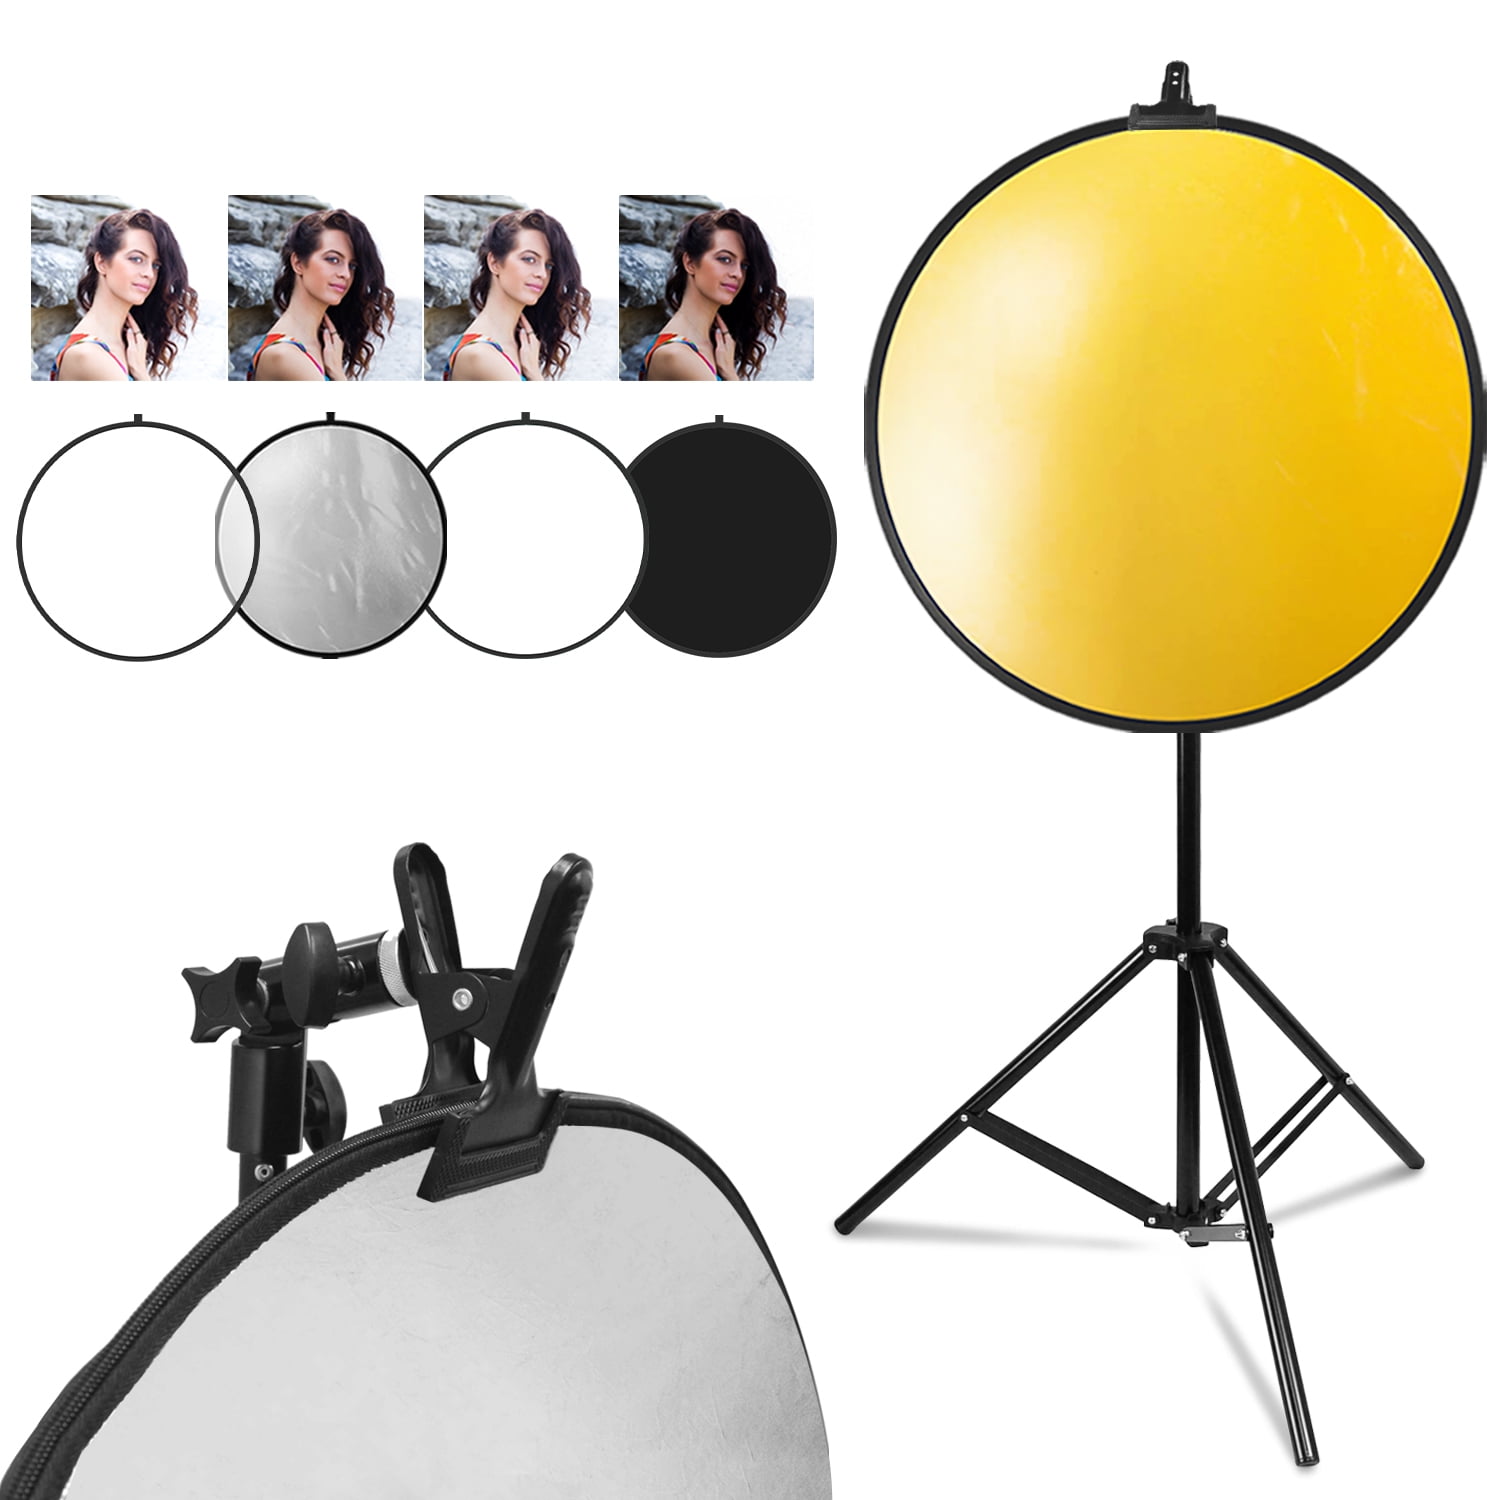 CHBC 5 in 1 60cm Light Mulit Collapsible Disc Photography Panel Reflector Diffuser 